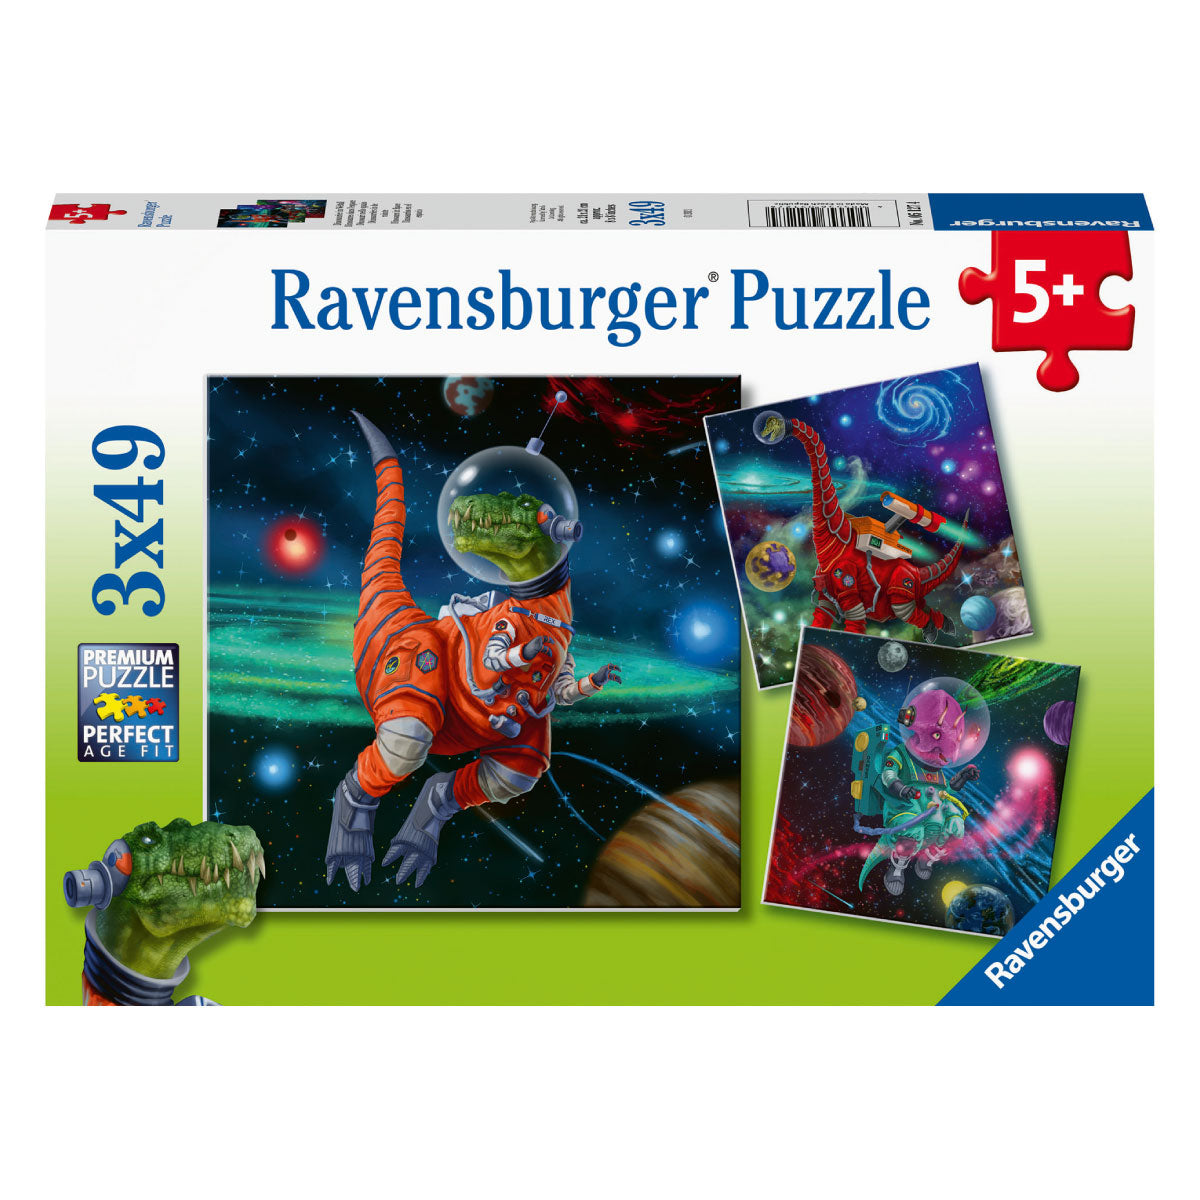 Dinosaurs in Space 3 x 49pc Jigsaw Puzzles from Ravensburger